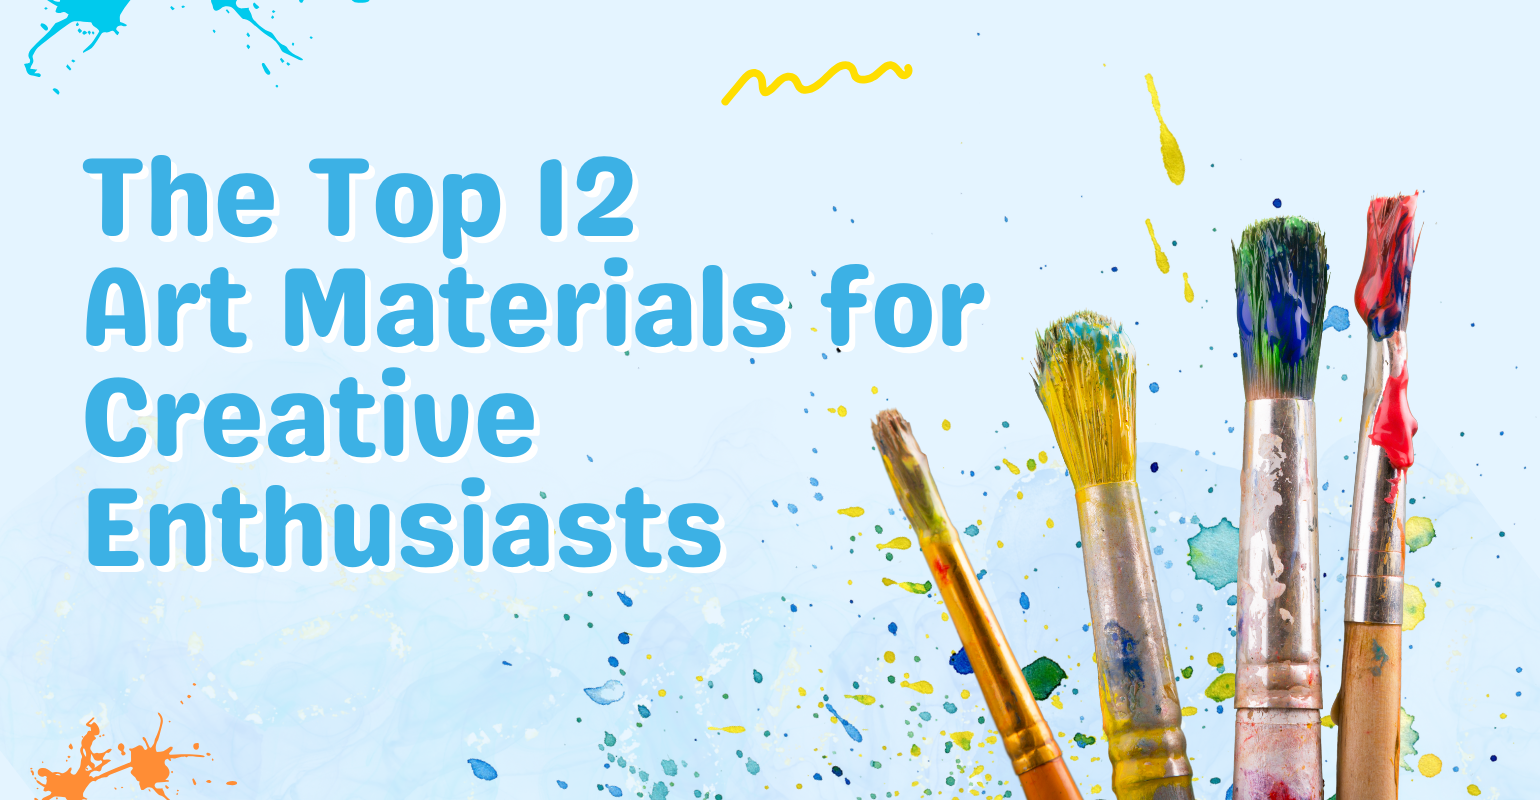 The Top 12 Art Materials for Creative Enthusiasts